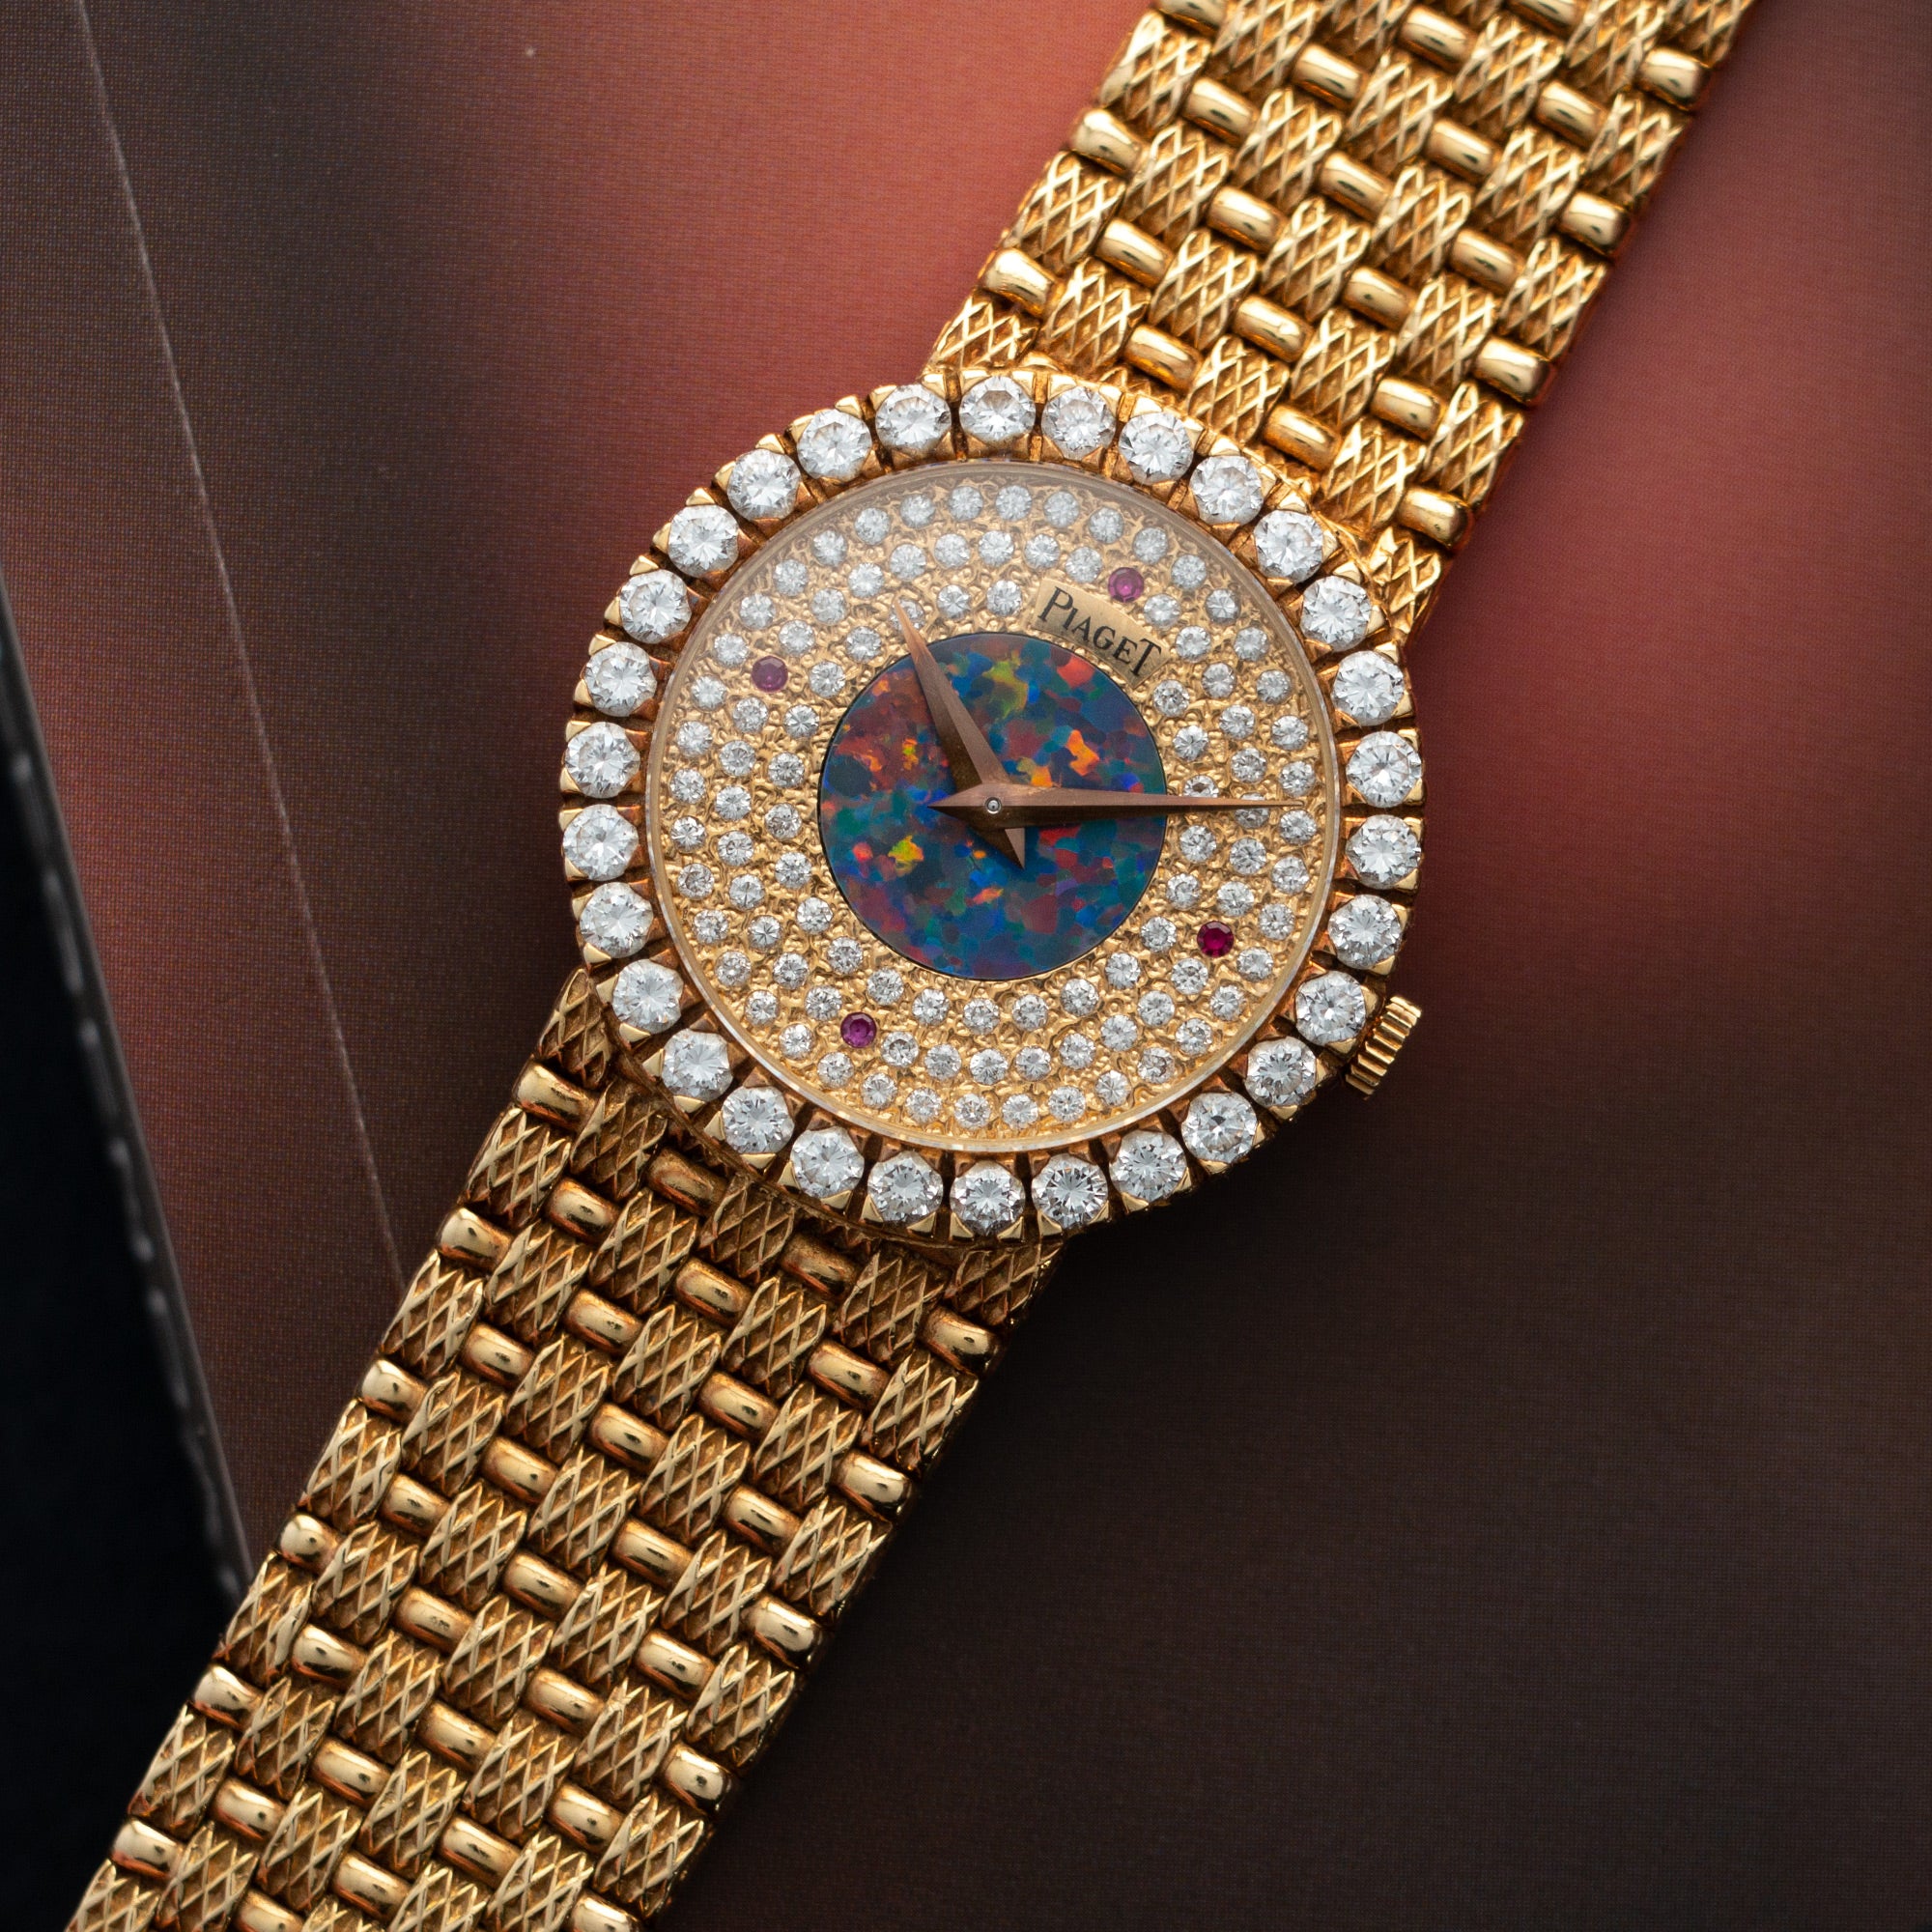 Piaget - Piaget Yellow Gold Watch with Diamond Bezel and Opal, Diamond and Ruby Dial - The Keystone Watches